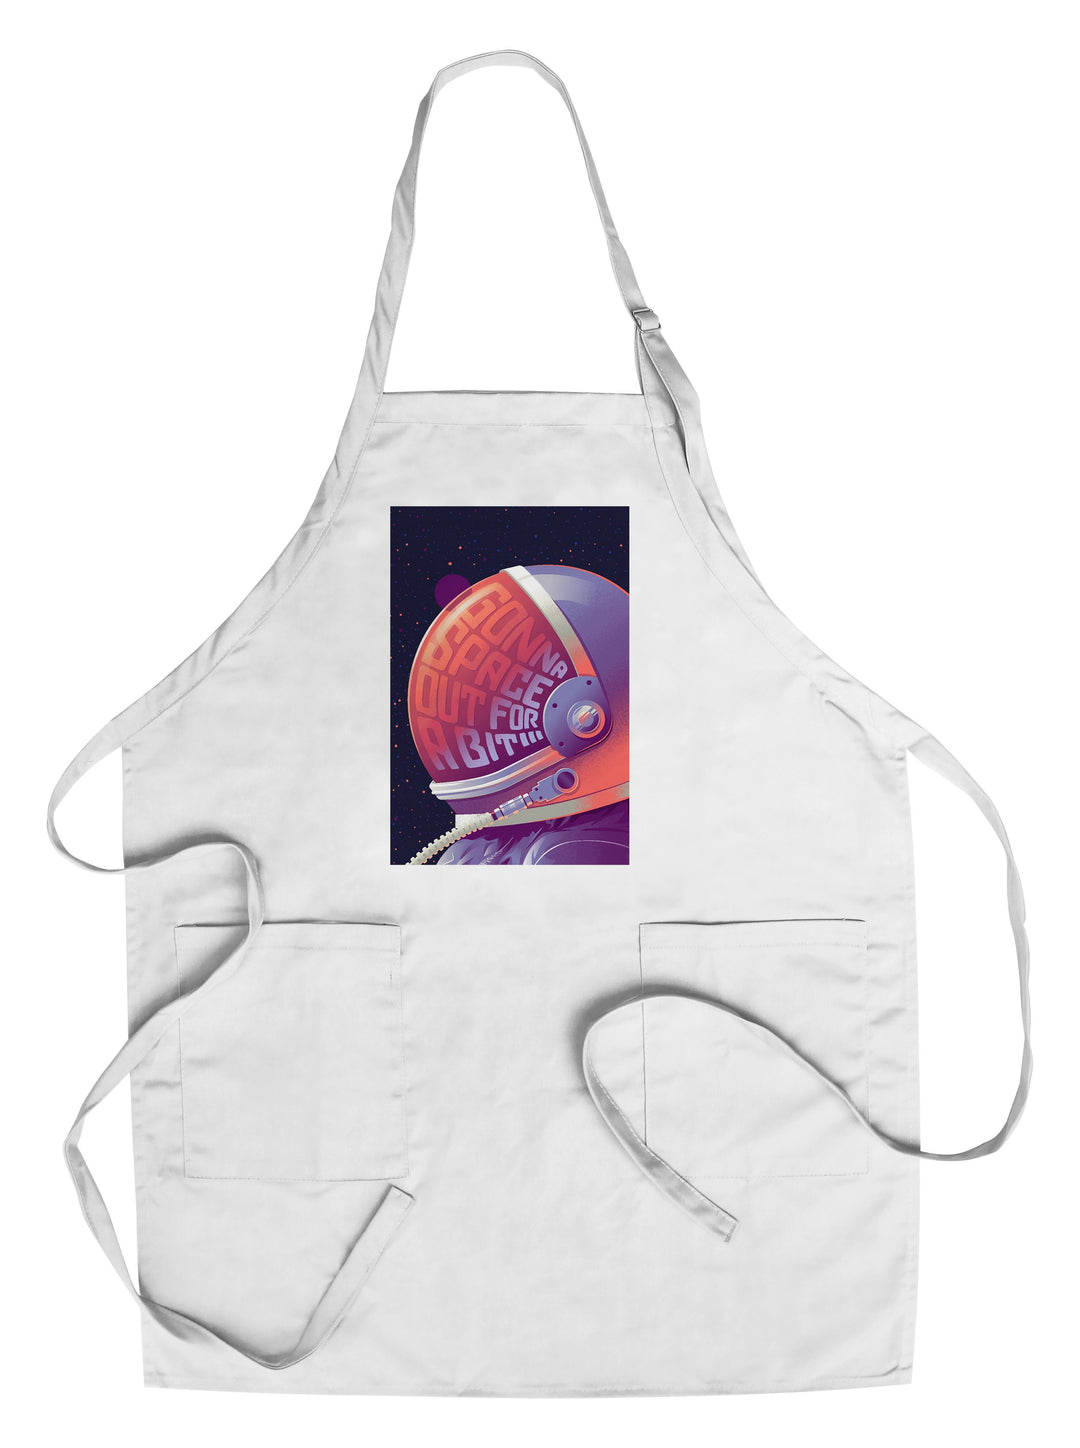 Spacethusiasm Collection, Astronaut, Gonna Space Out For A Bit, Towels and Aprons Kitchen Lantern Press Chef's Apron 